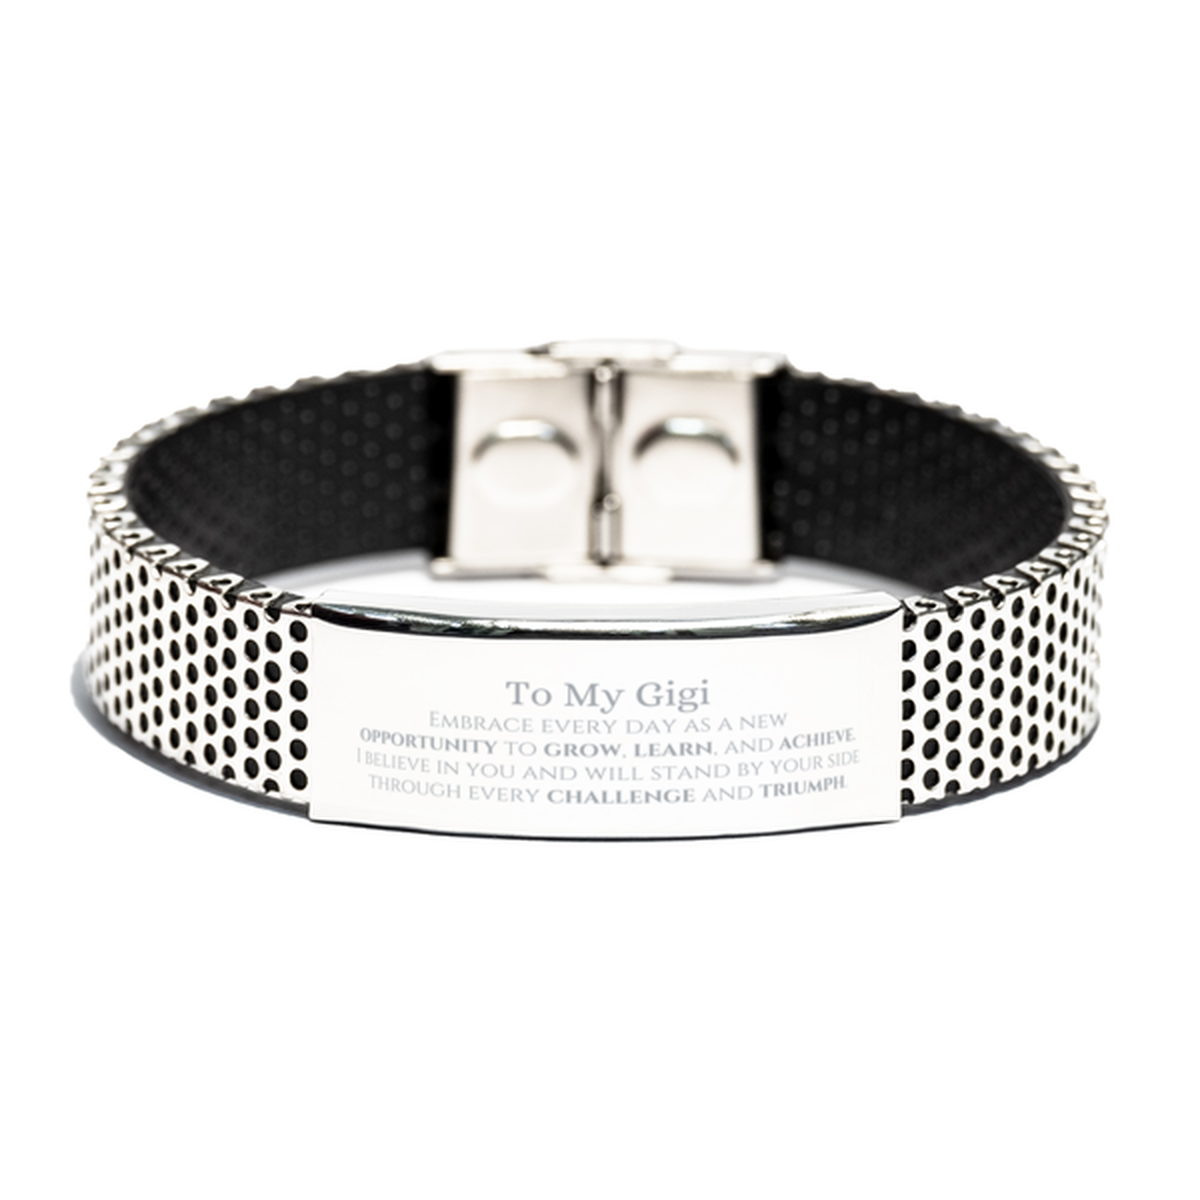 To My Gigi Gifts, I believe in you and will stand by your side, Inspirational Stainless Steel Bracelet For Gigi, Birthday Christmas Motivational Gigi Gifts